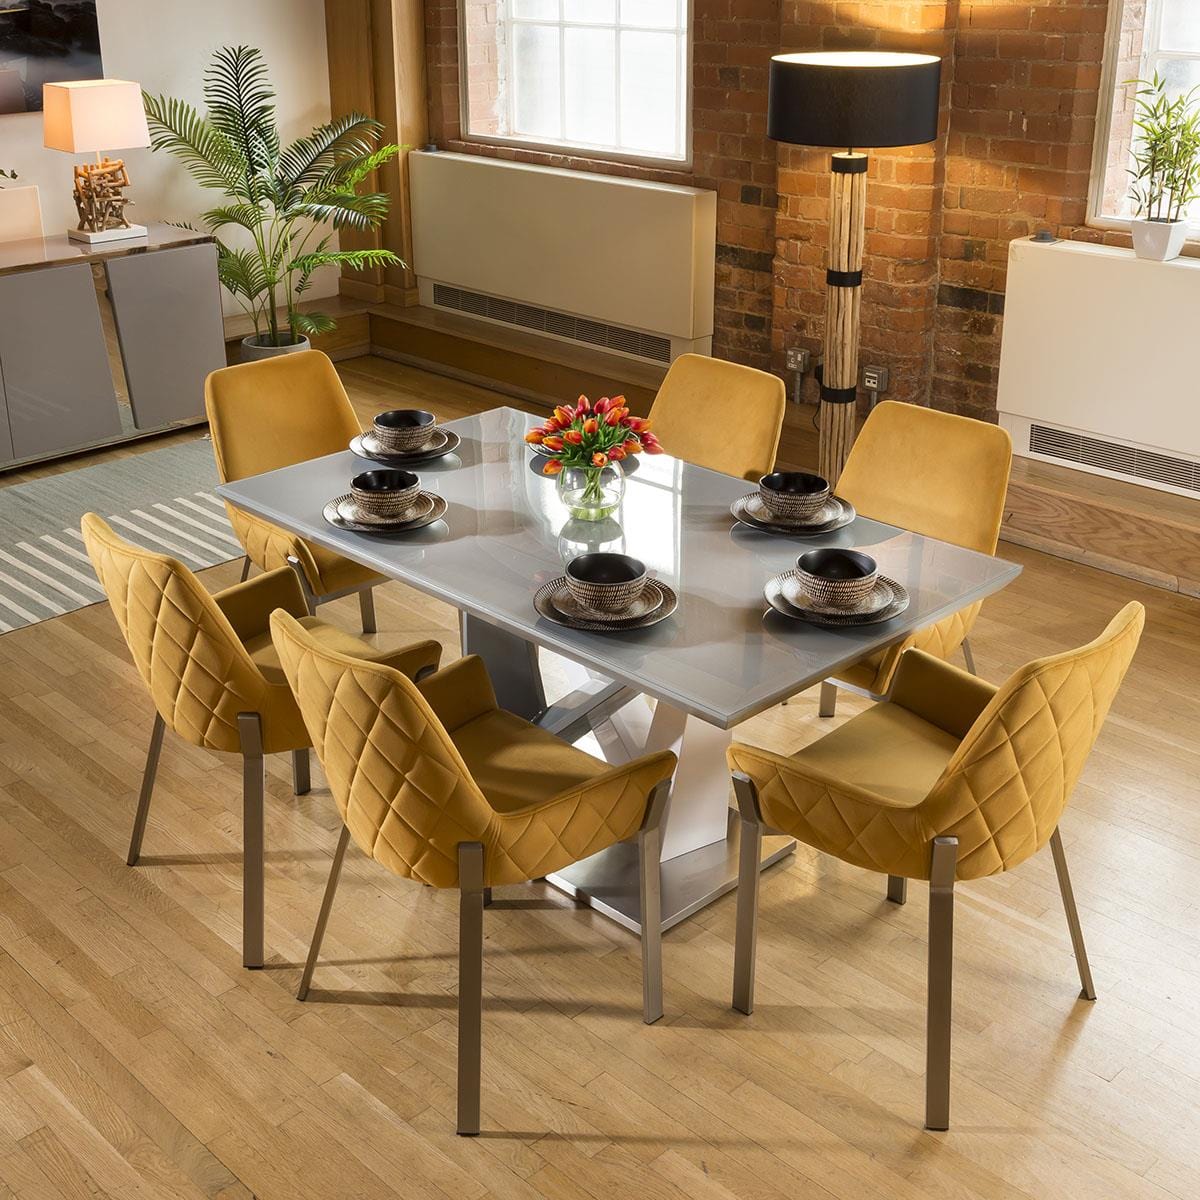 Quatropi Stunning 6 Seater Dining Set Grey / Glass Table With 6 Mustard Chairs